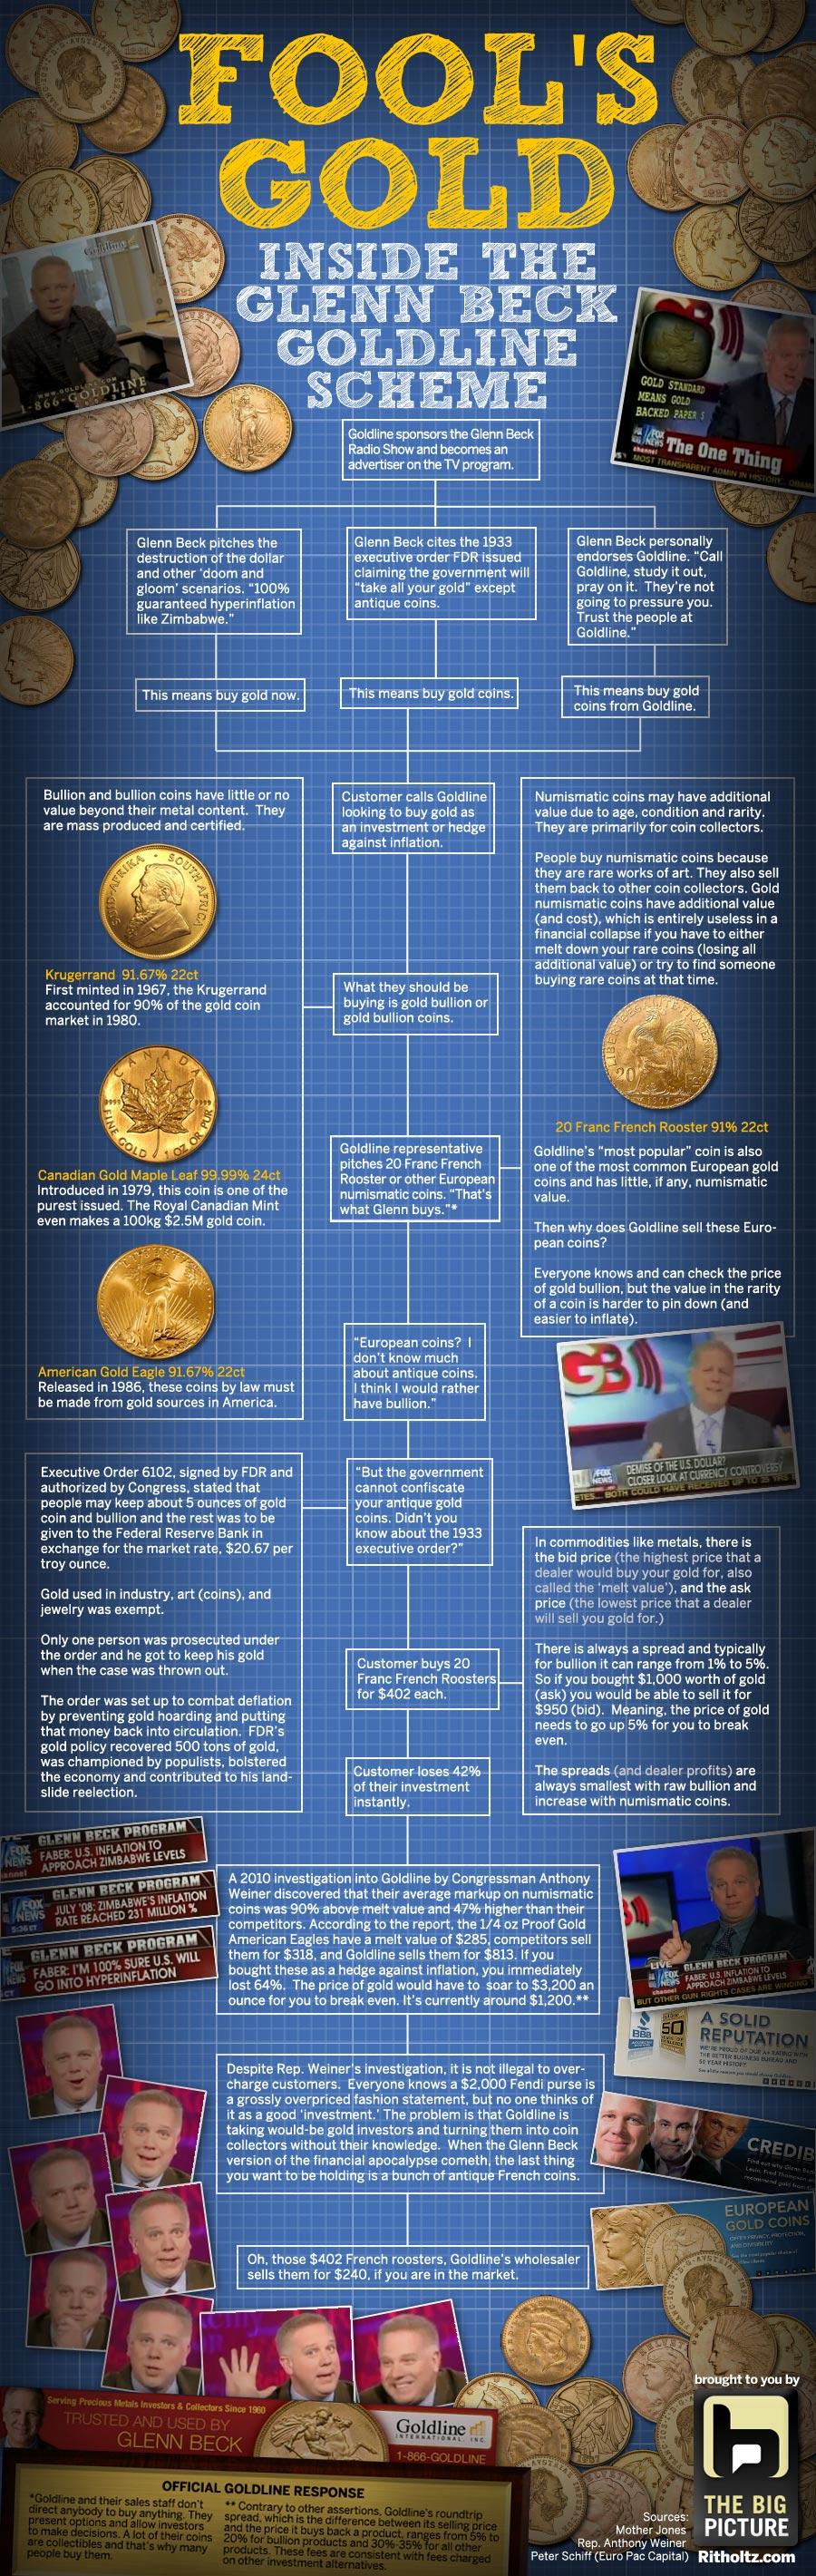 You've heard of the Glenn Beck gold sponsorship, but to really understand how many ways this scheme is dubious, check out this big infographic